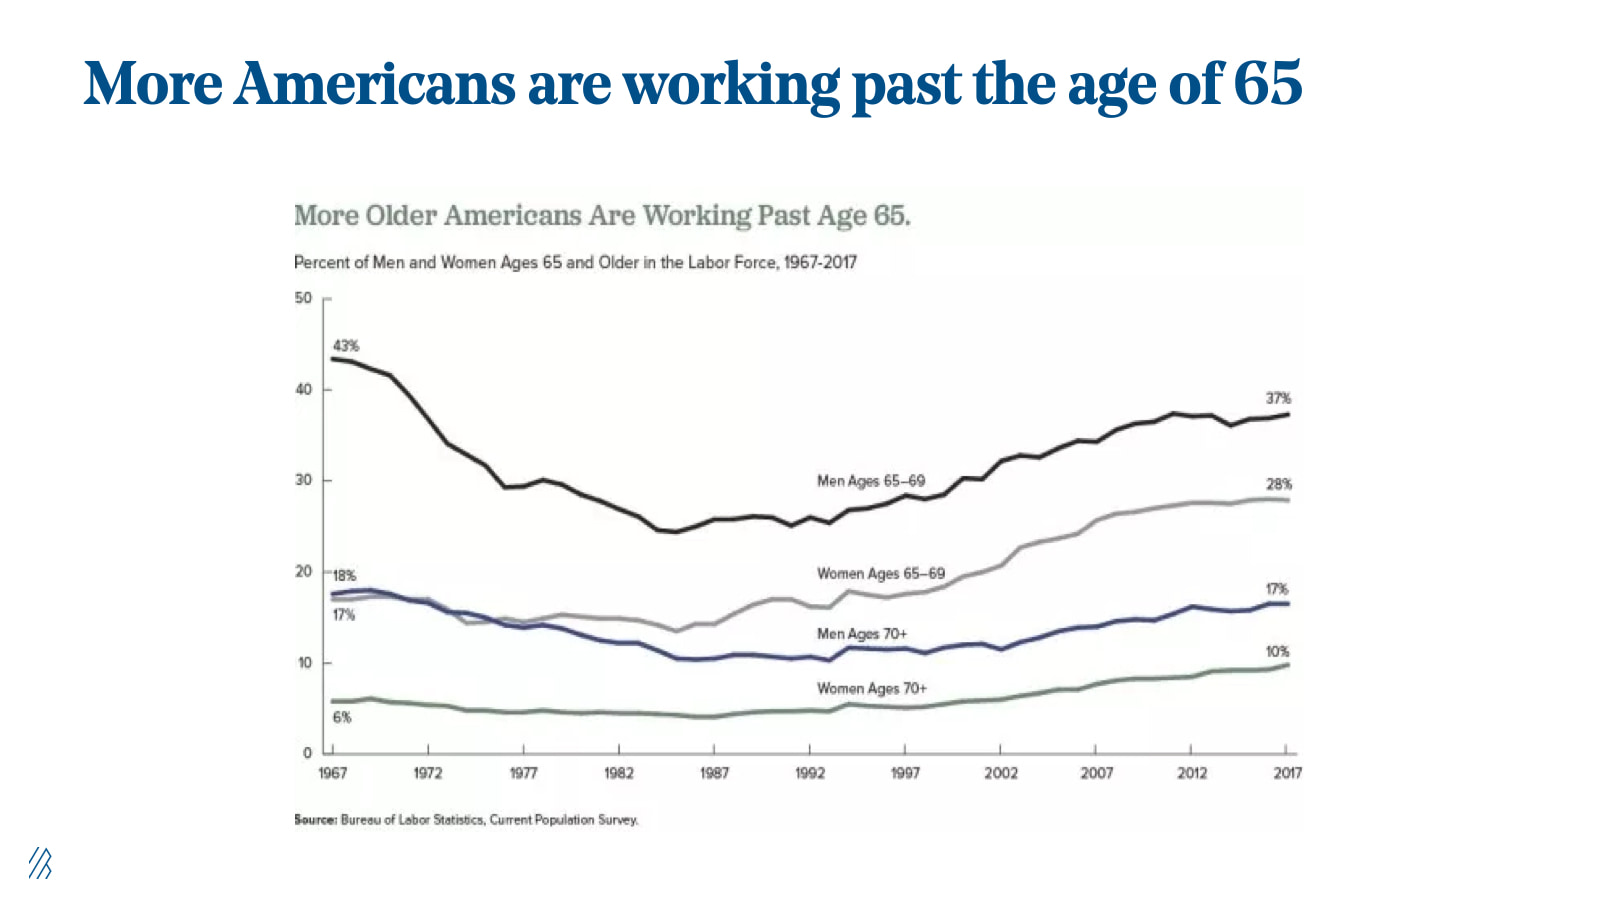 More Americans are working past the age of 65